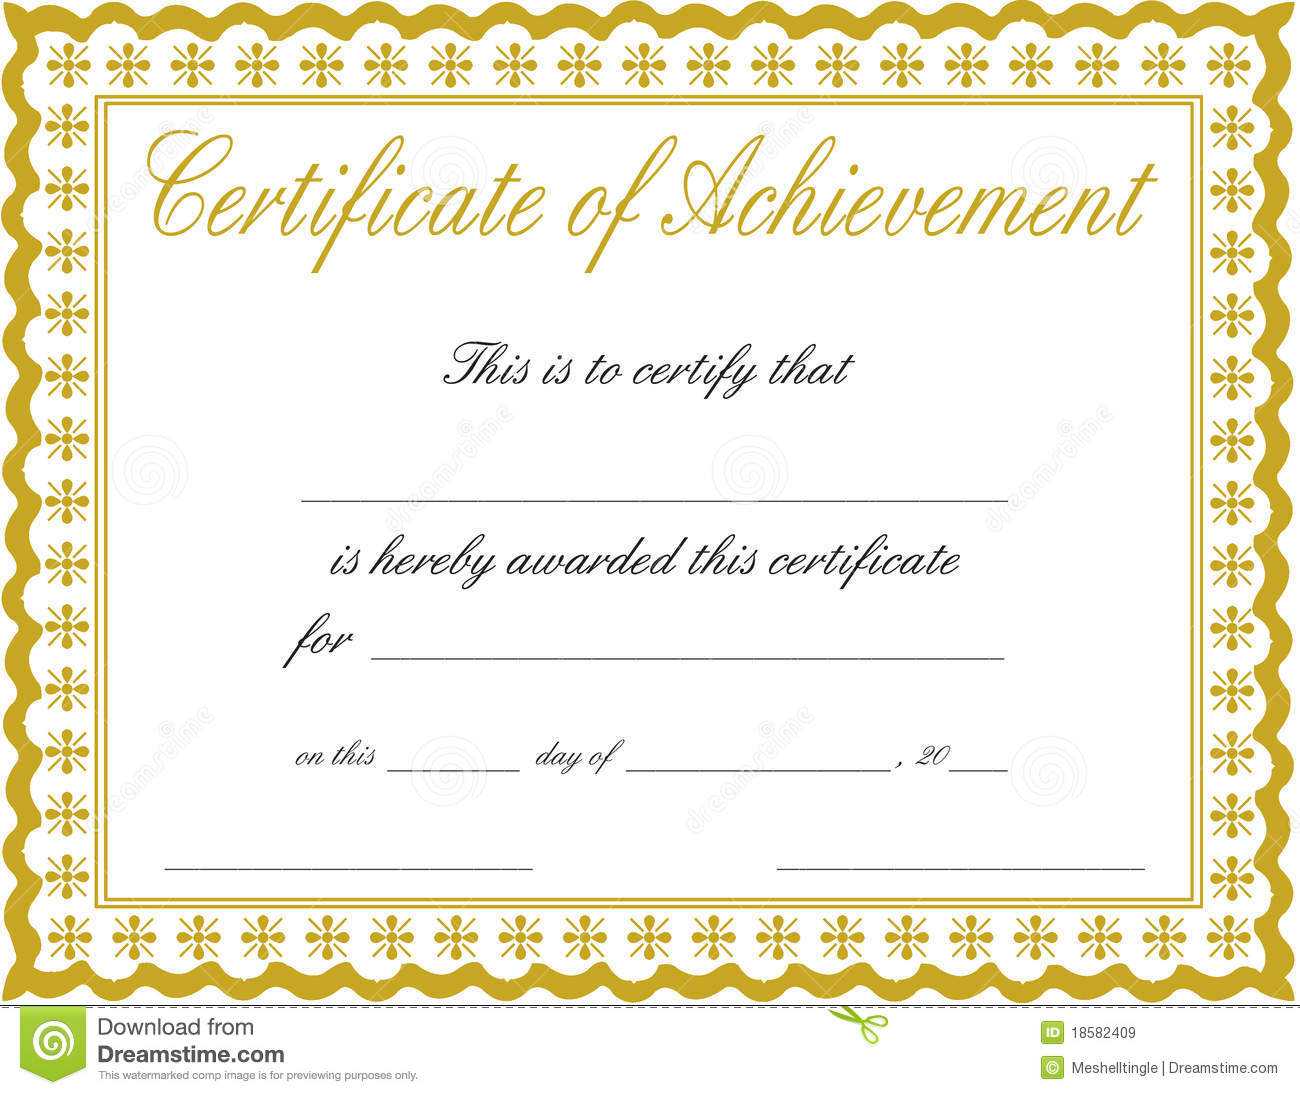 Certificate Of Accomplishment Template Throughout Certificate Templates For Word Free Downloads